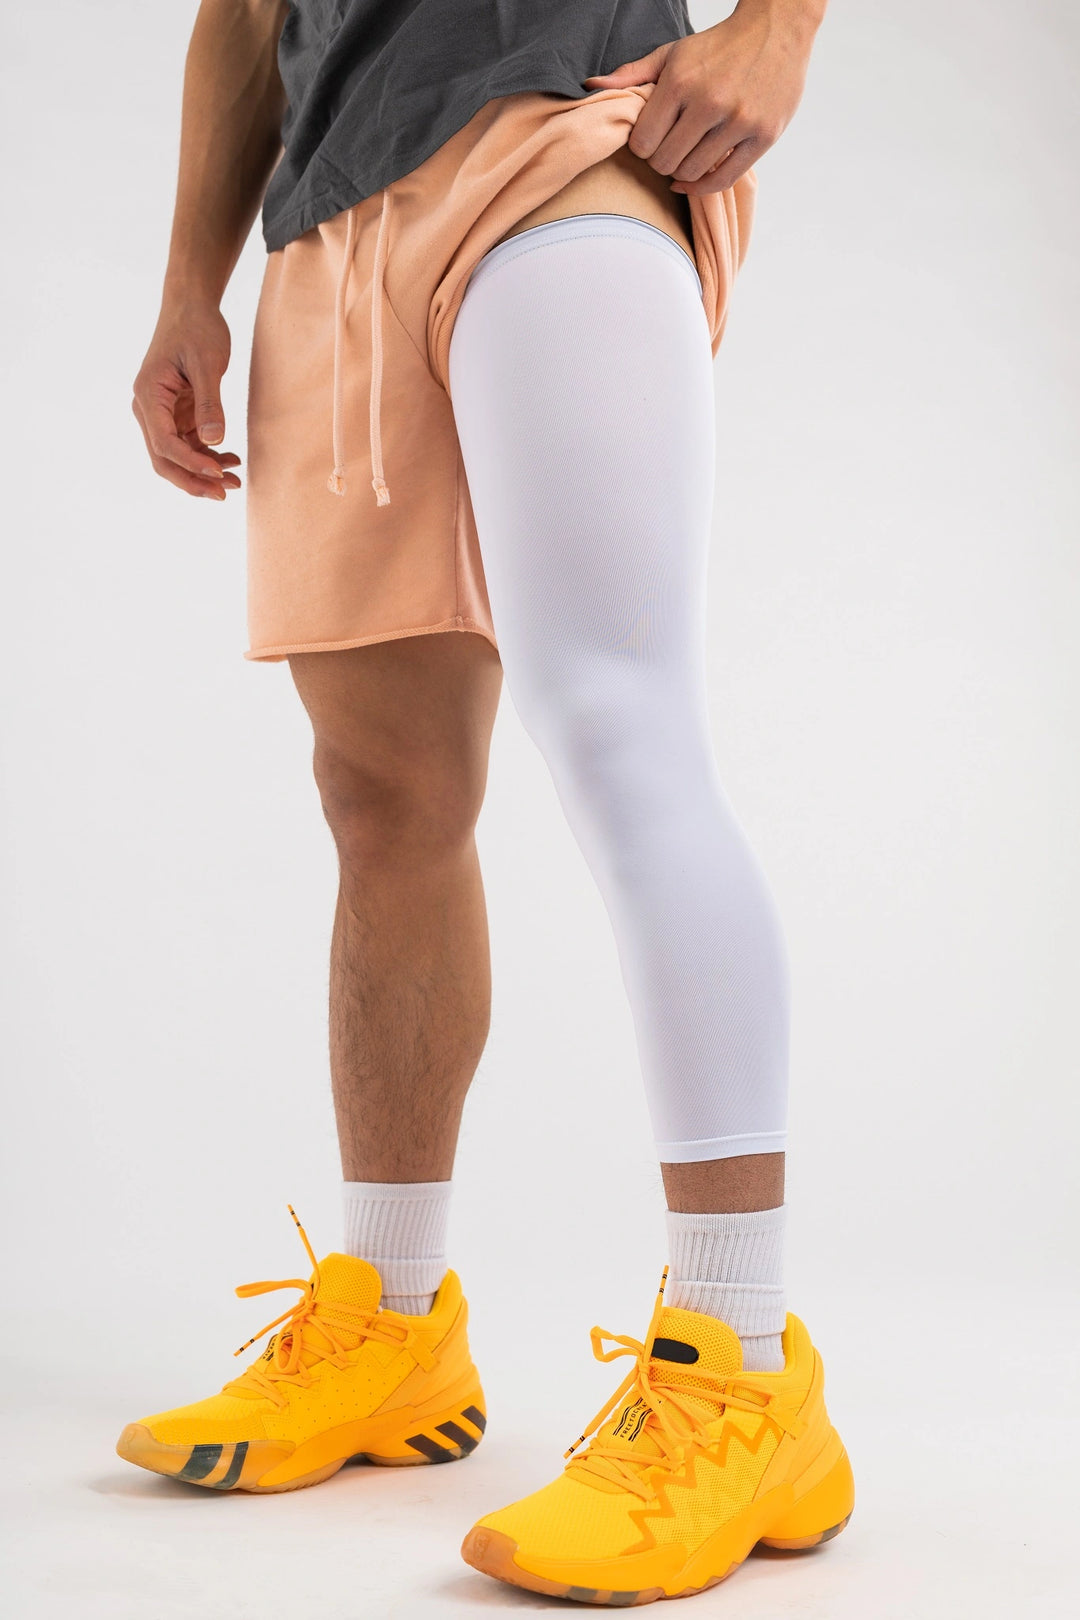 Shop Padded Leg Sleeve Basketball with great discounts and prices